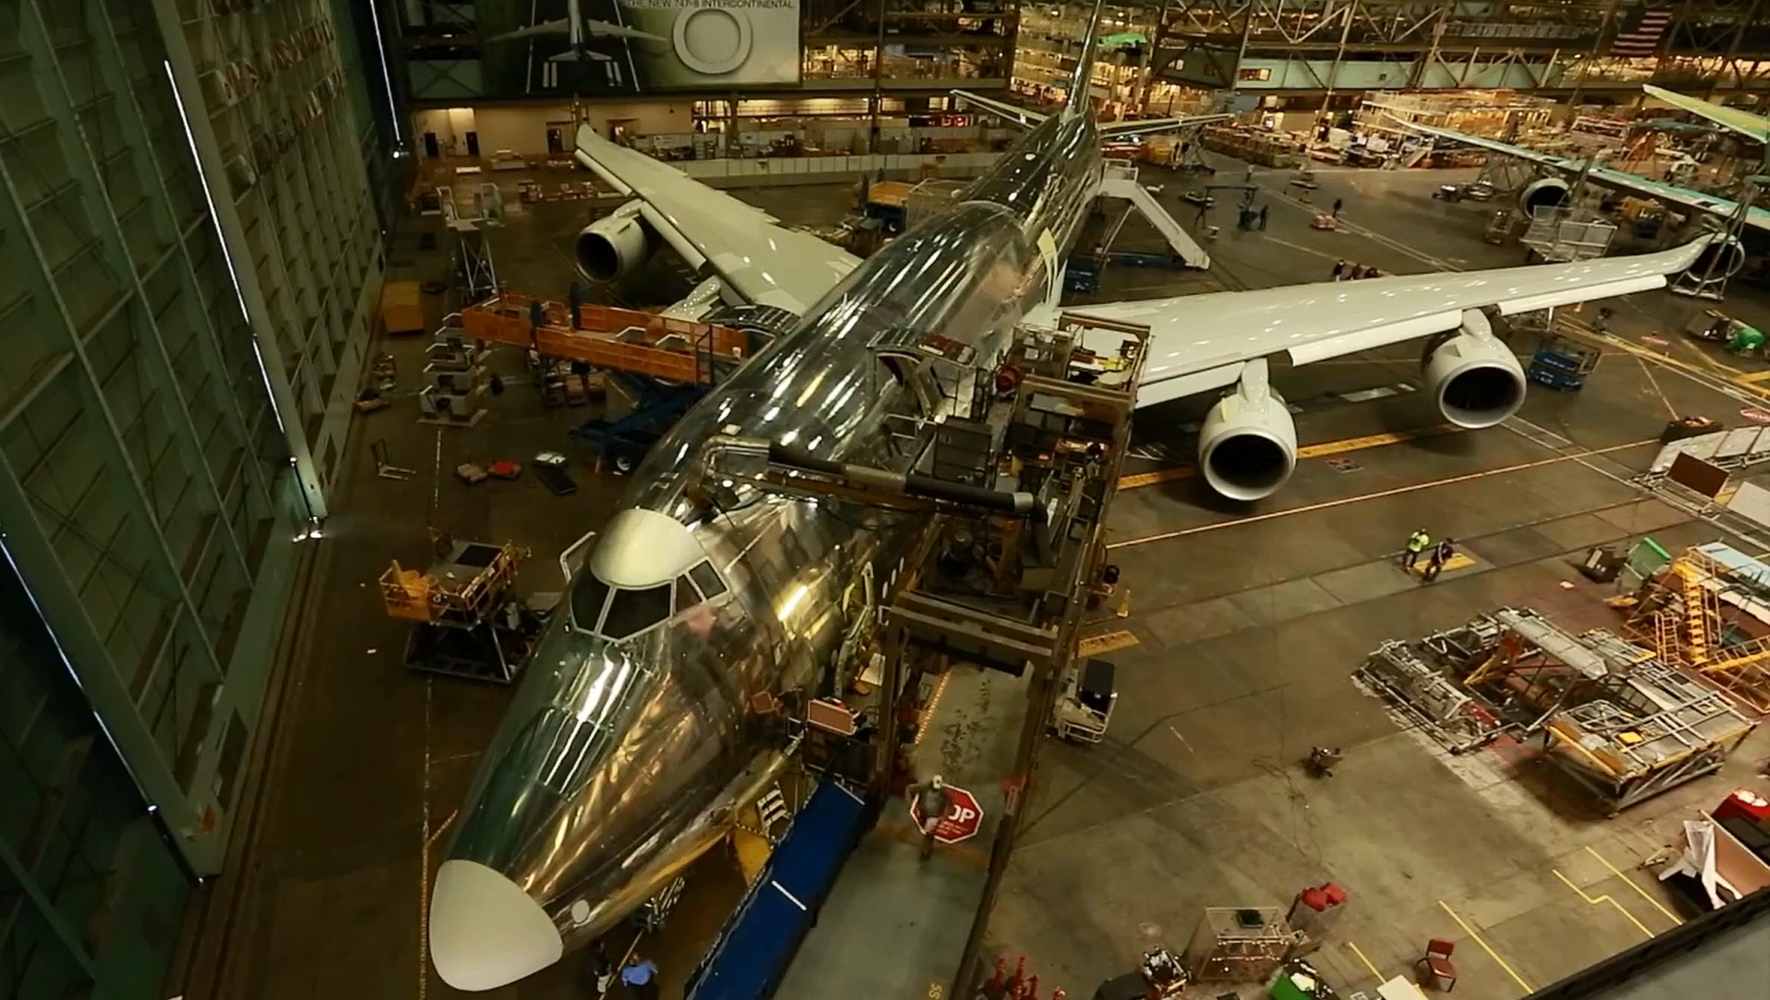 Tour the Boeing Factory with Lufthansa